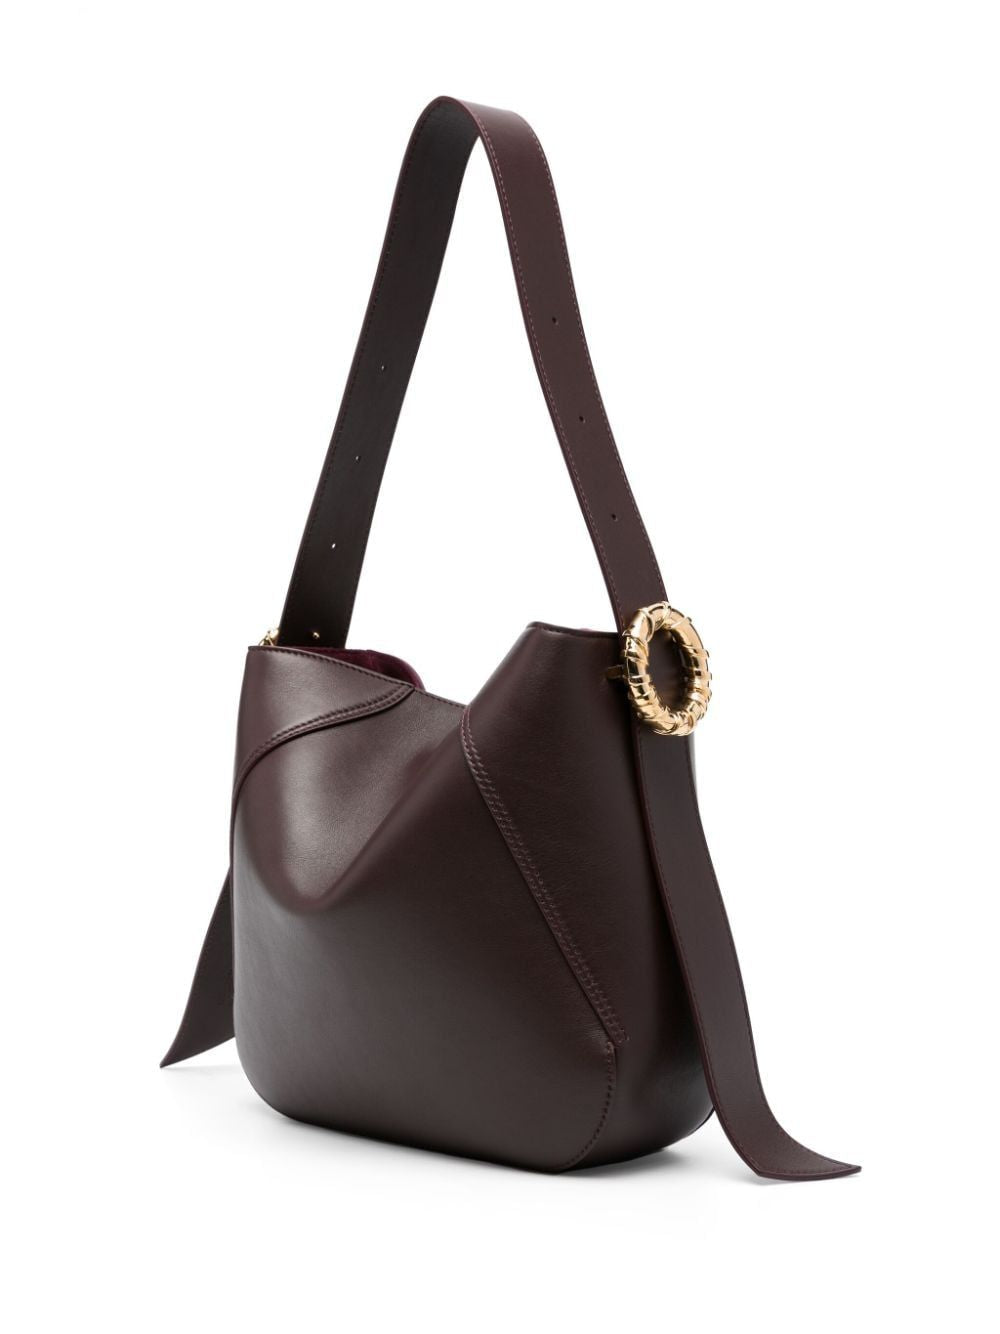 LANVIN Luxurious Burgundy Suede Hobo Bag for Women - FW23 Collection